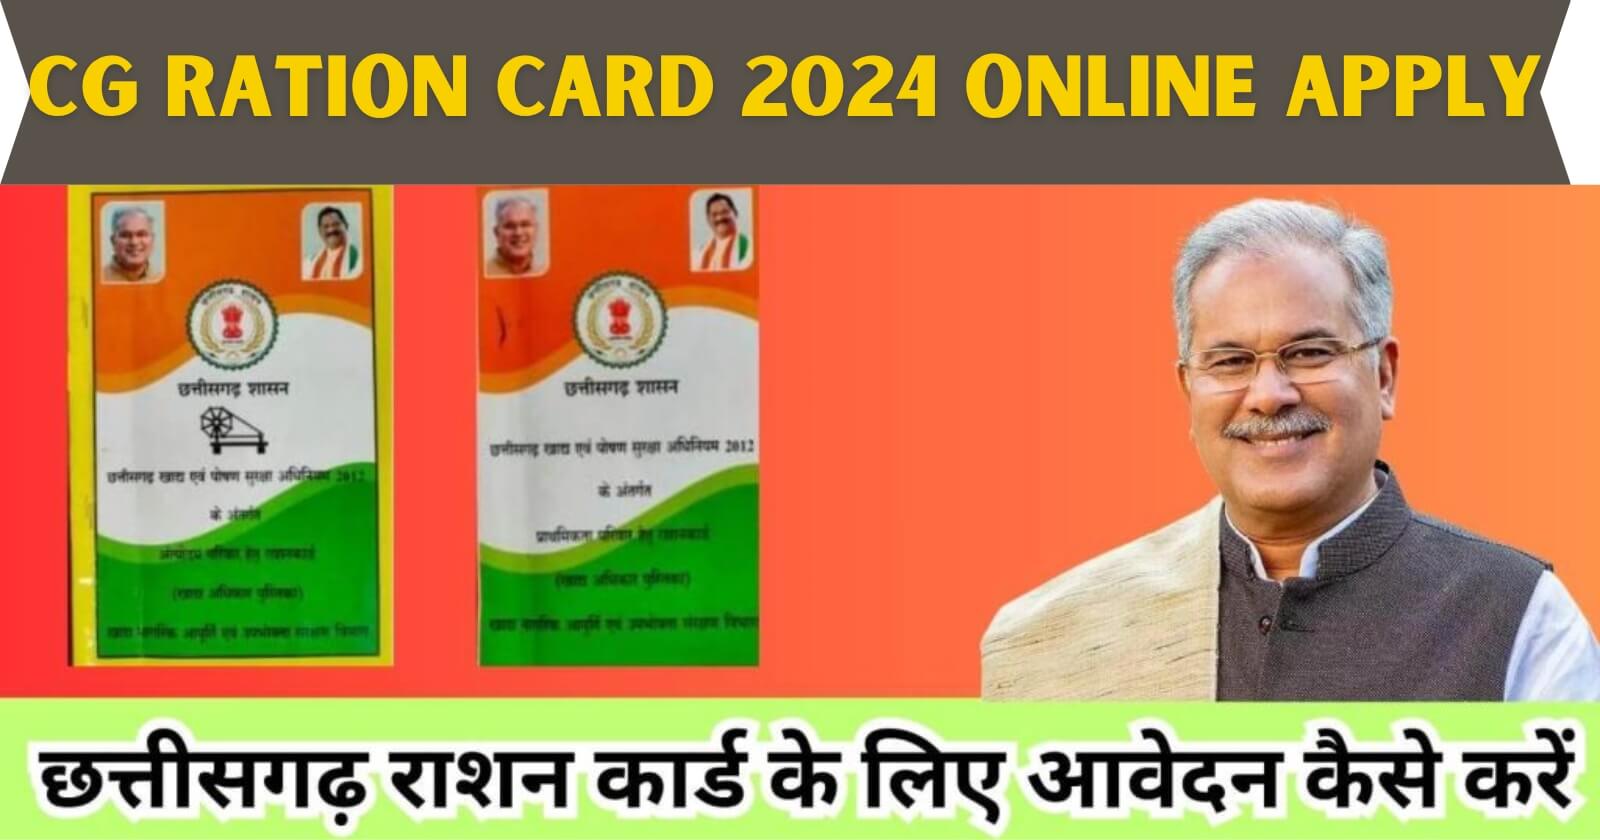 CG Ration Card 2024 Online Apply